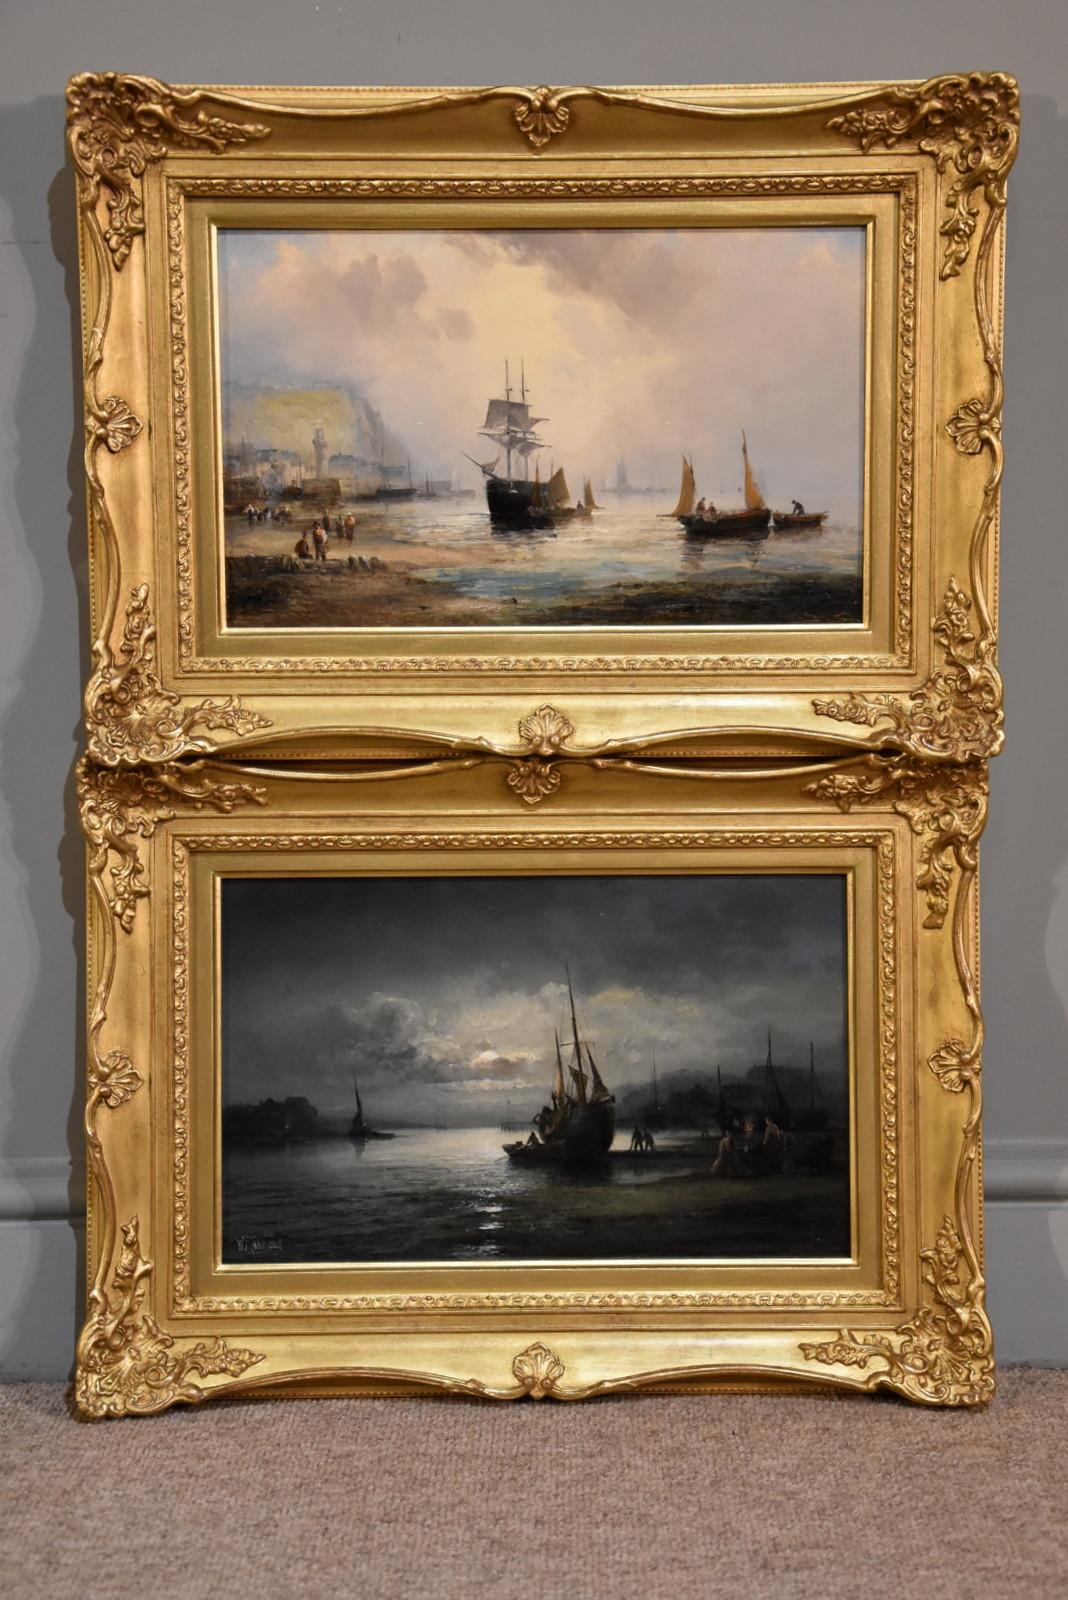 George William Thornley Landscape Painting - "Shoreham" and "Scarborough" pair by William Thornley